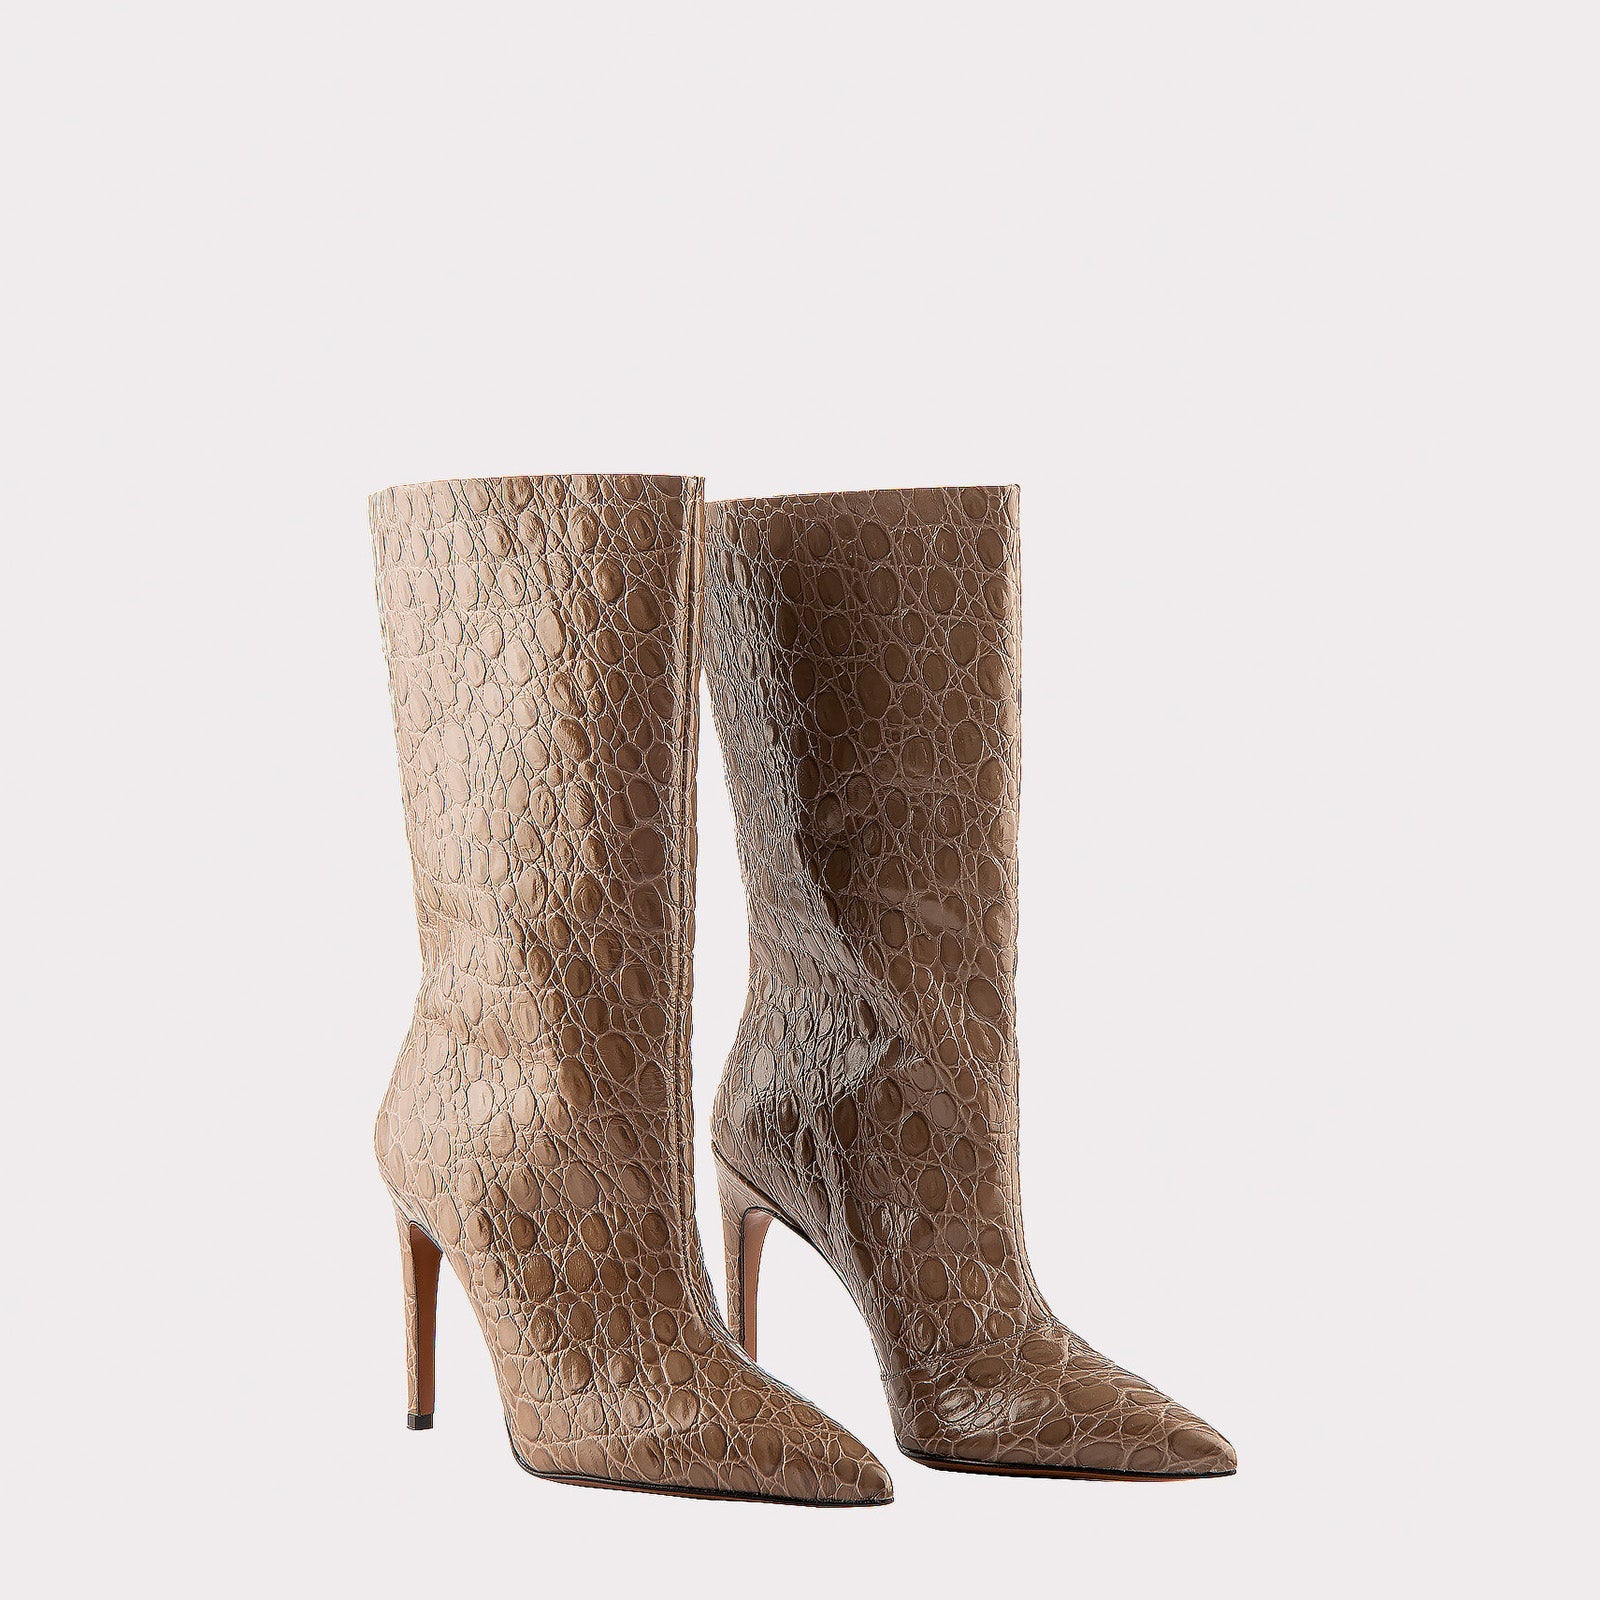 TEXTURED LEATHER BOOTS ANNIE